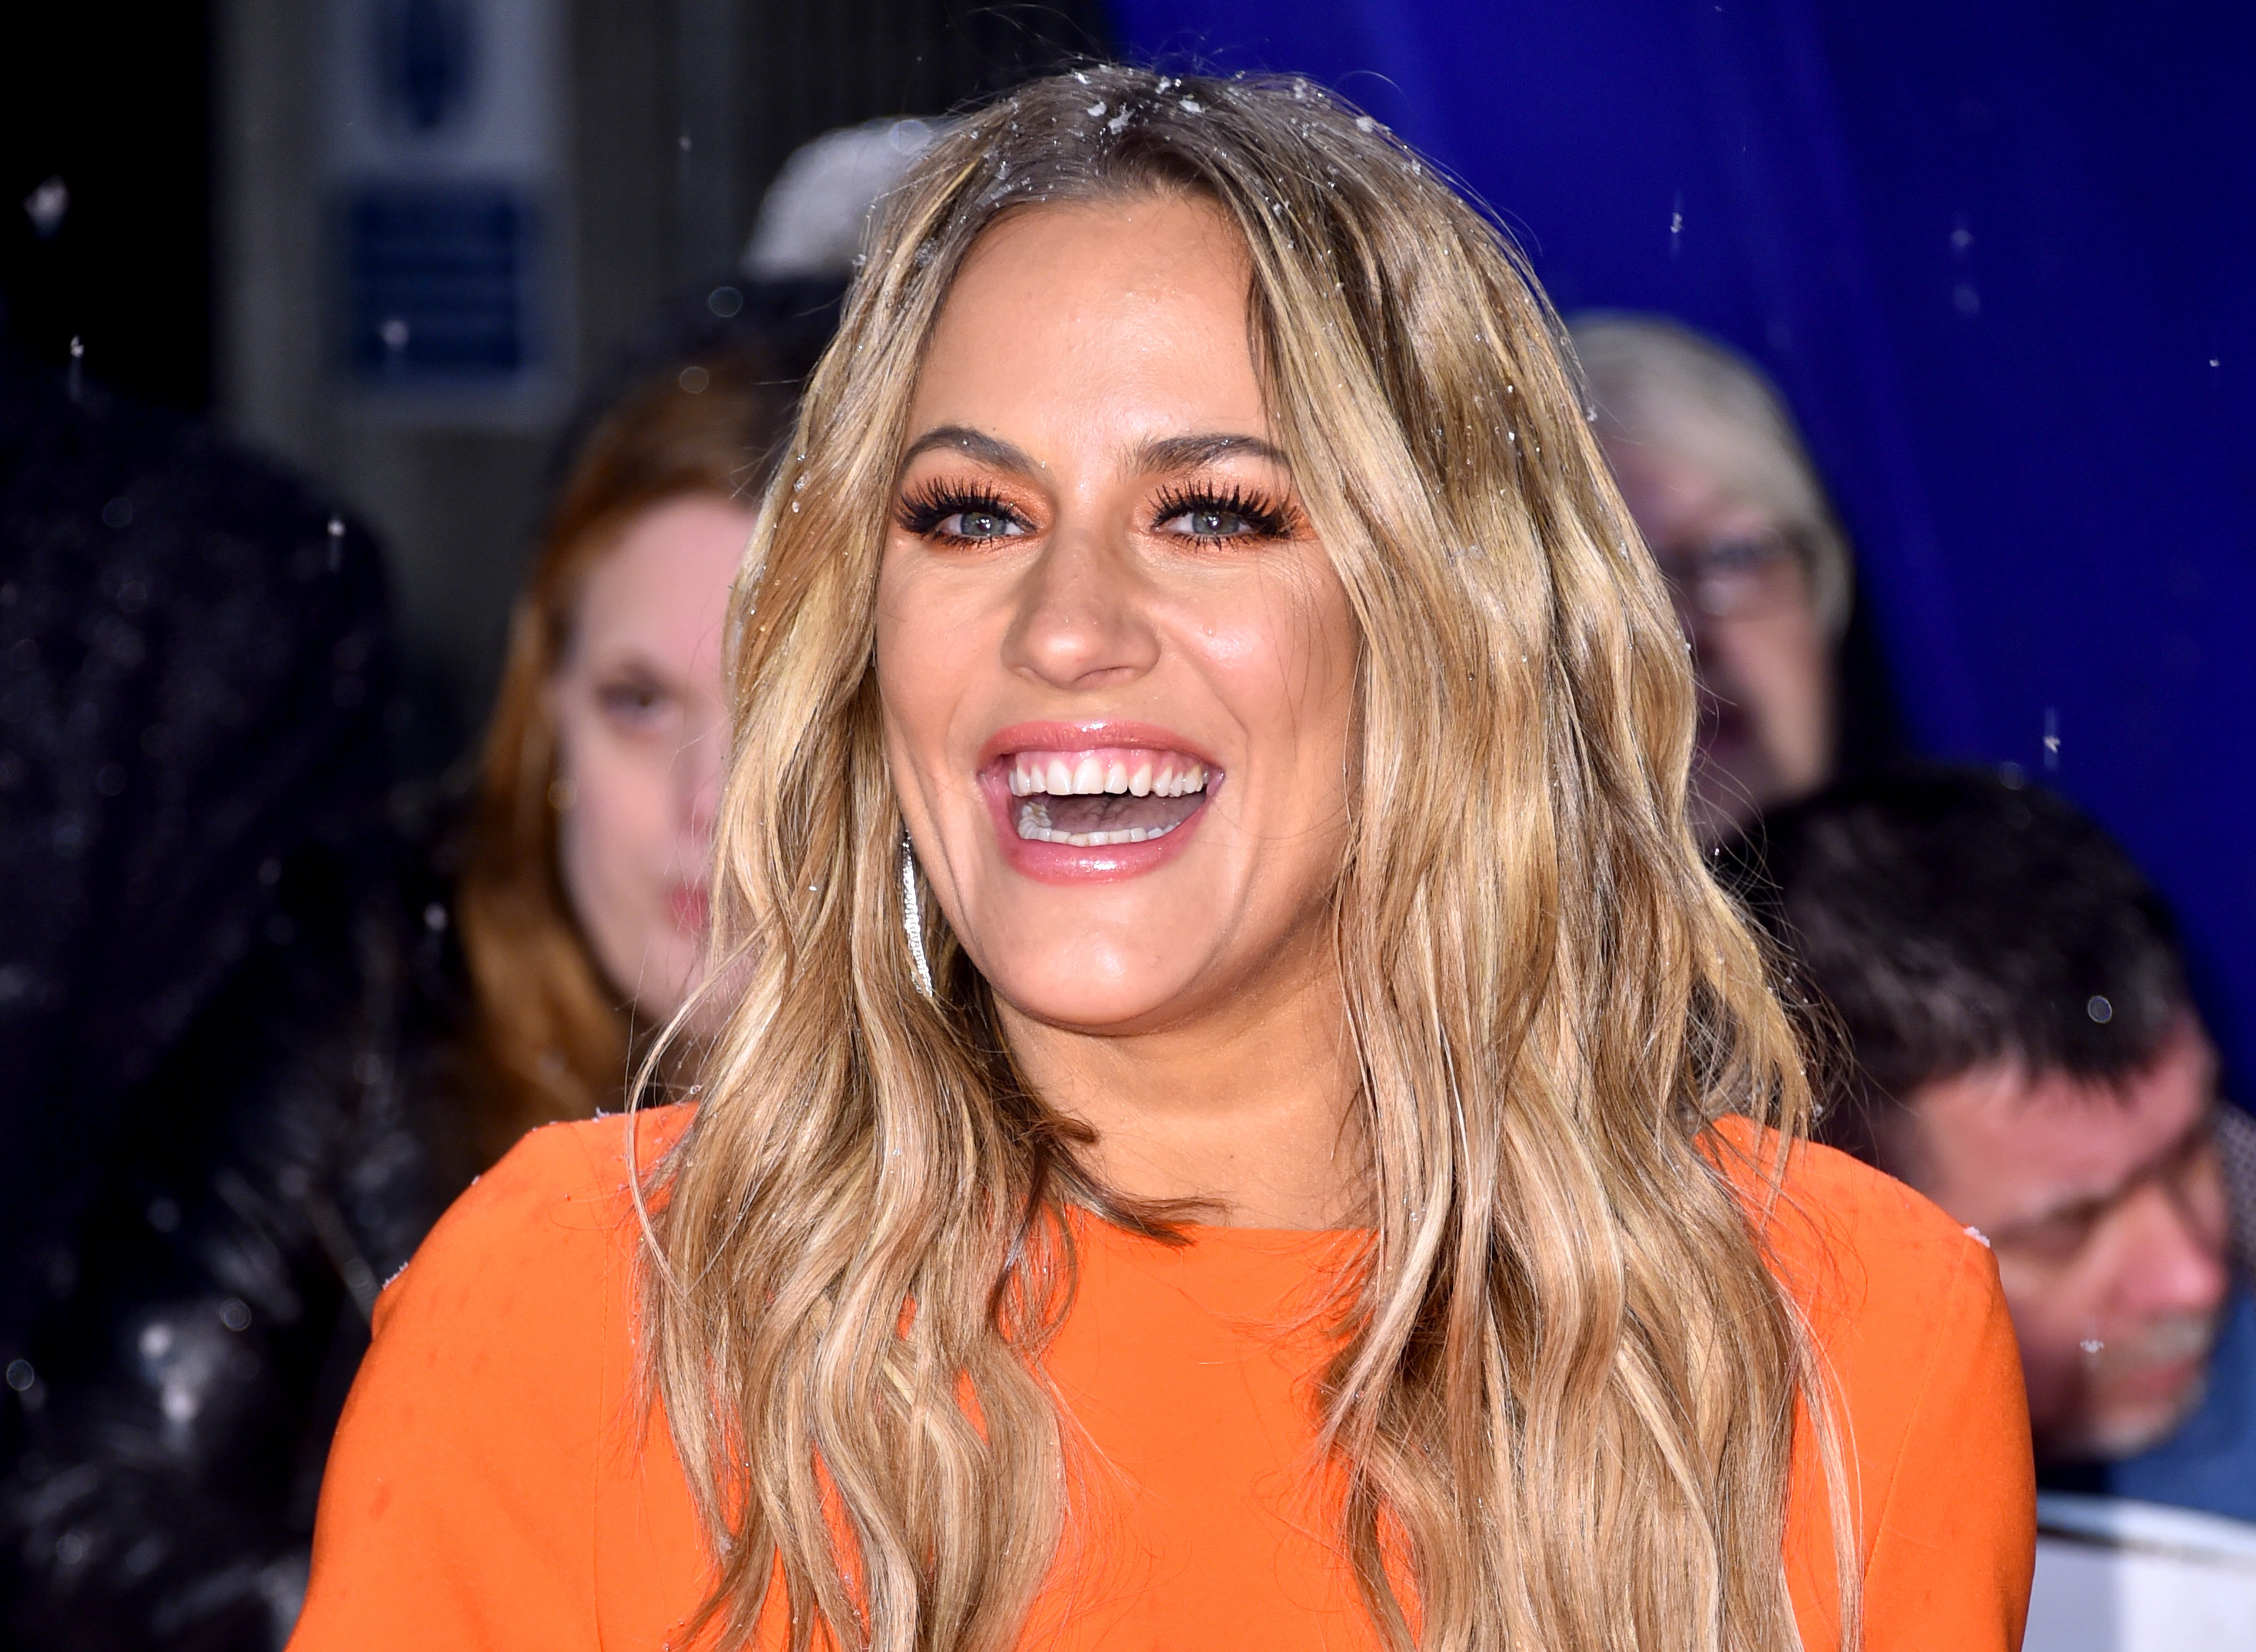 Caroline Flack has defended Love Island following the deaths of two former contestants, saying negative headlines about the show made her "angry".